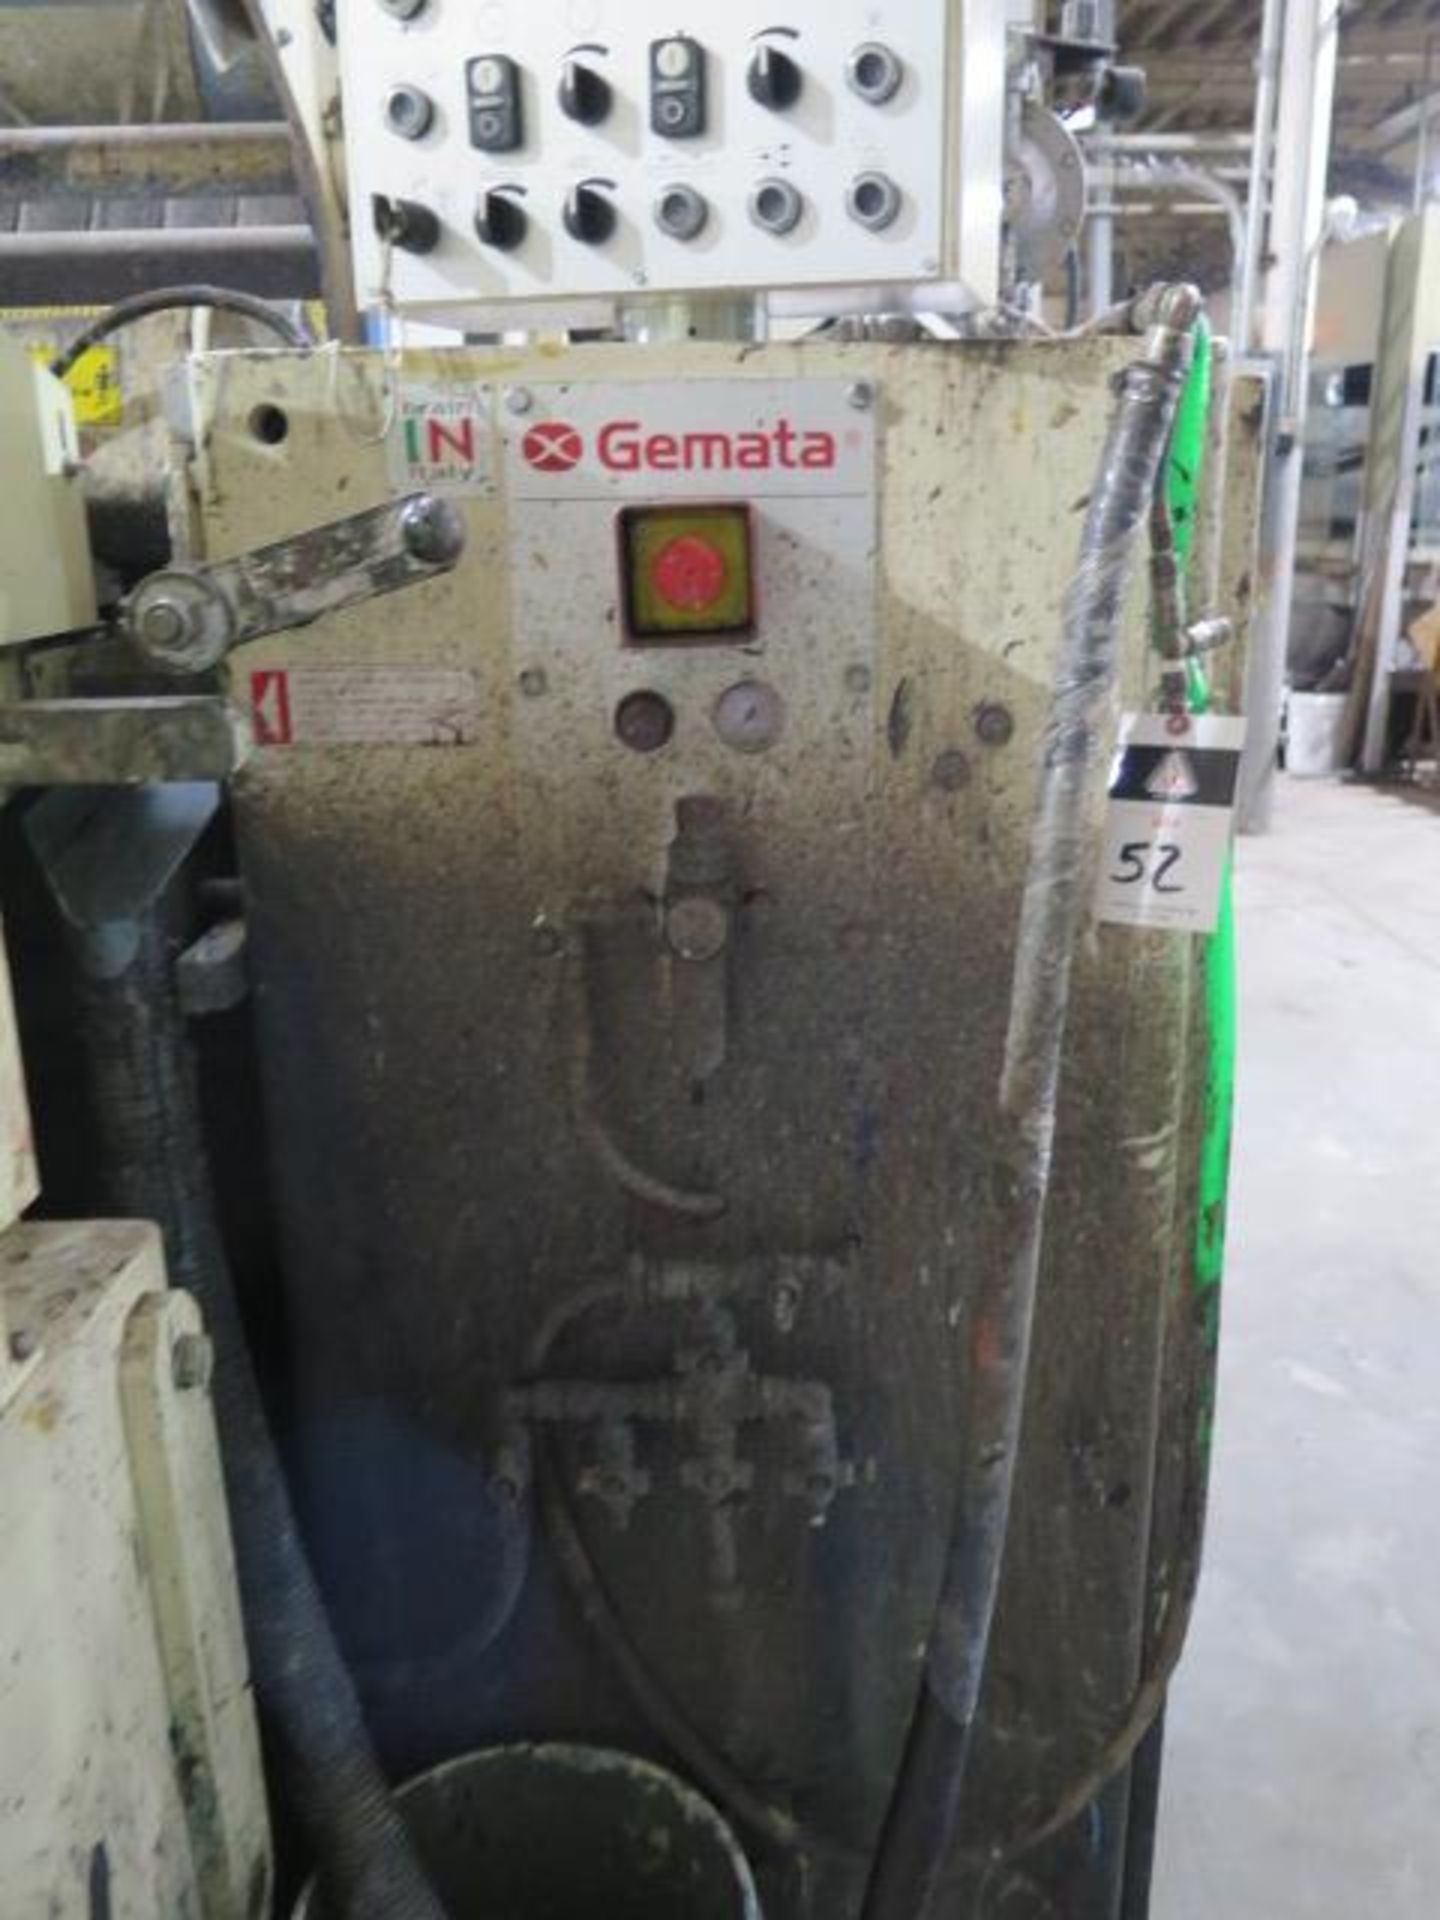 2015 Gemata Rifinizlone A Rullo “Megastar” 3400/3/15 Roller Pigment Coating Machine SOLD AS IS - Image 15 of 17